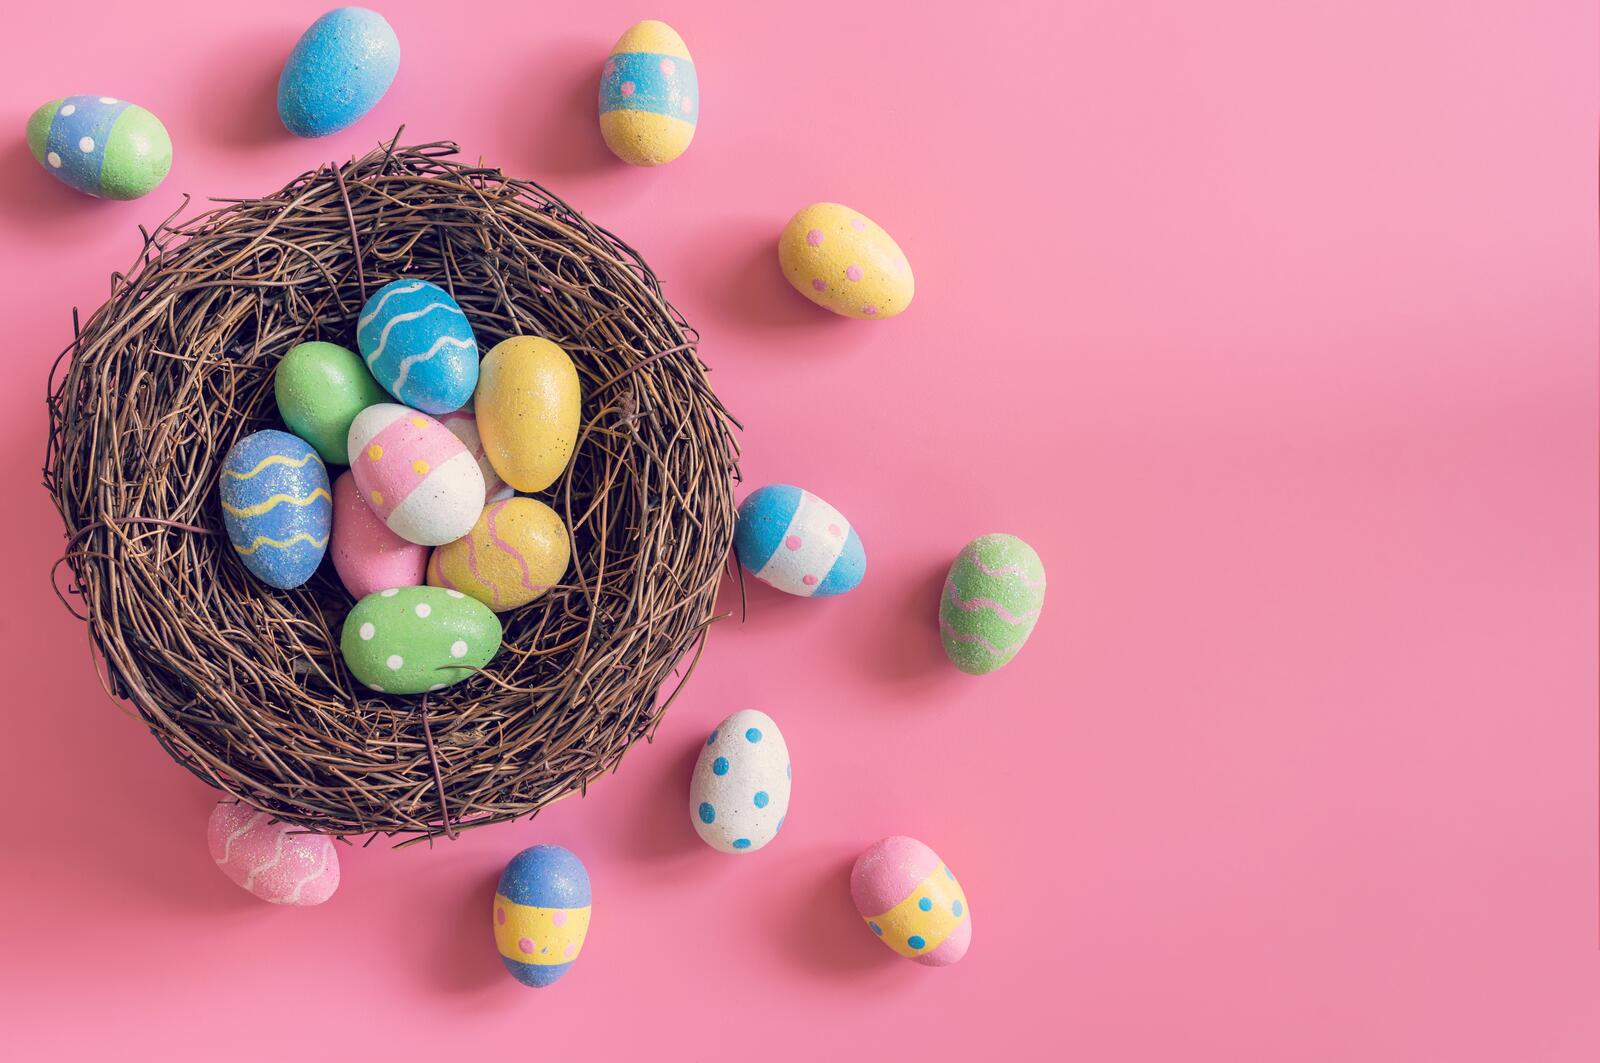 Wallpapers easter eggs pink background holidays on the desktop